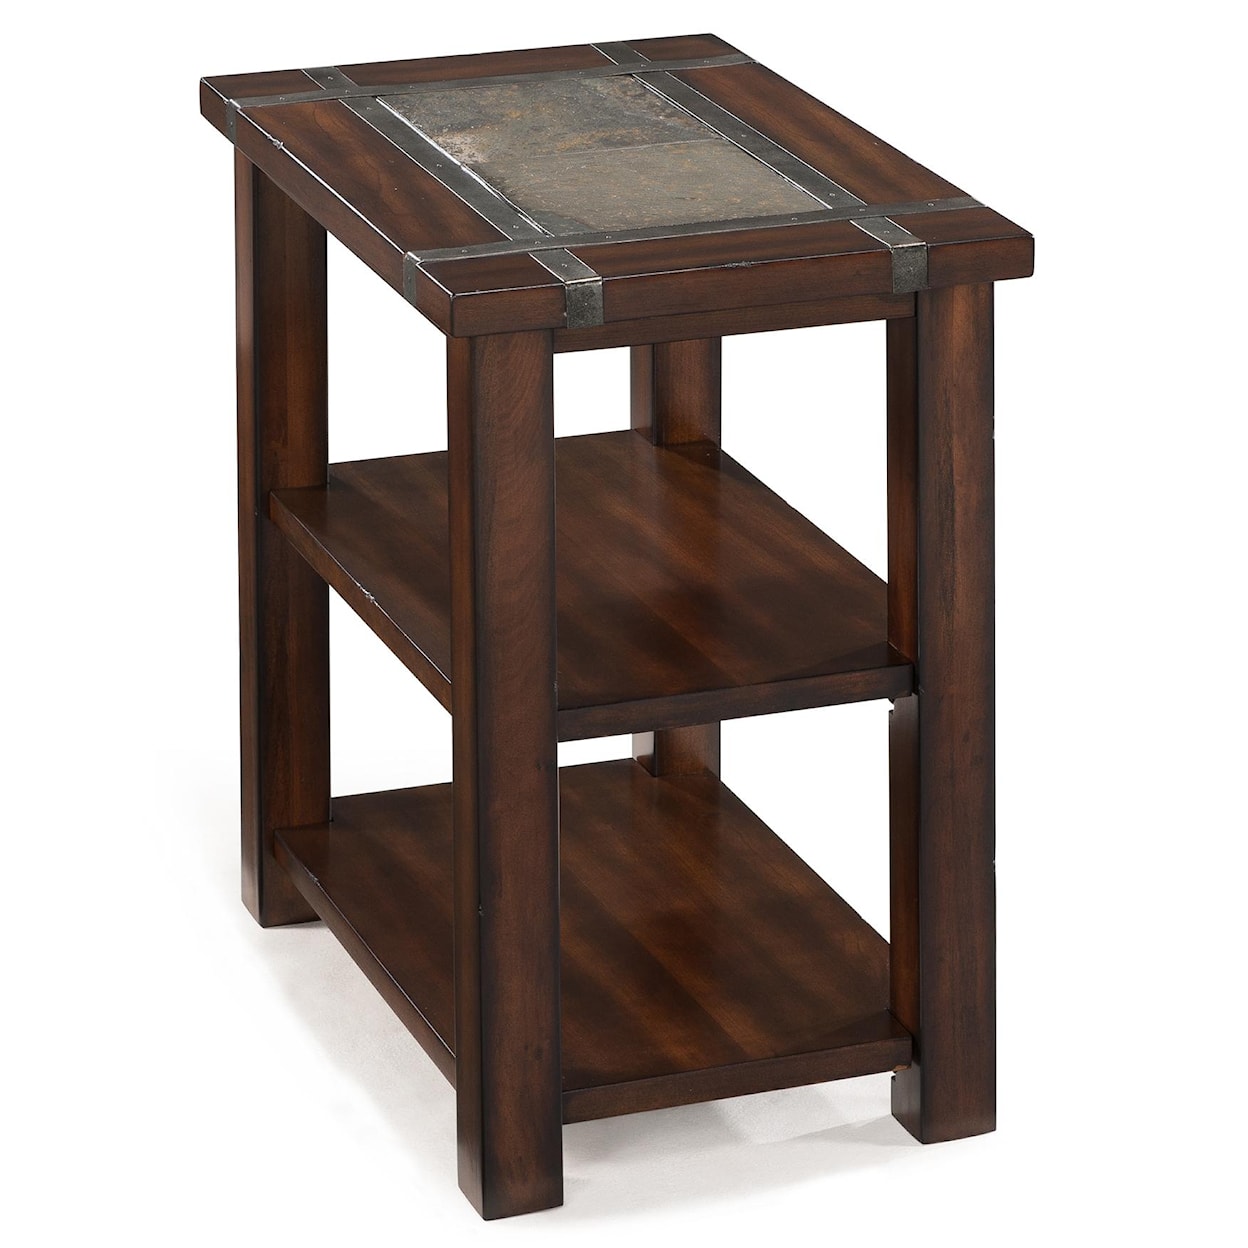 Magnussen Home Saratoga Chairside Table